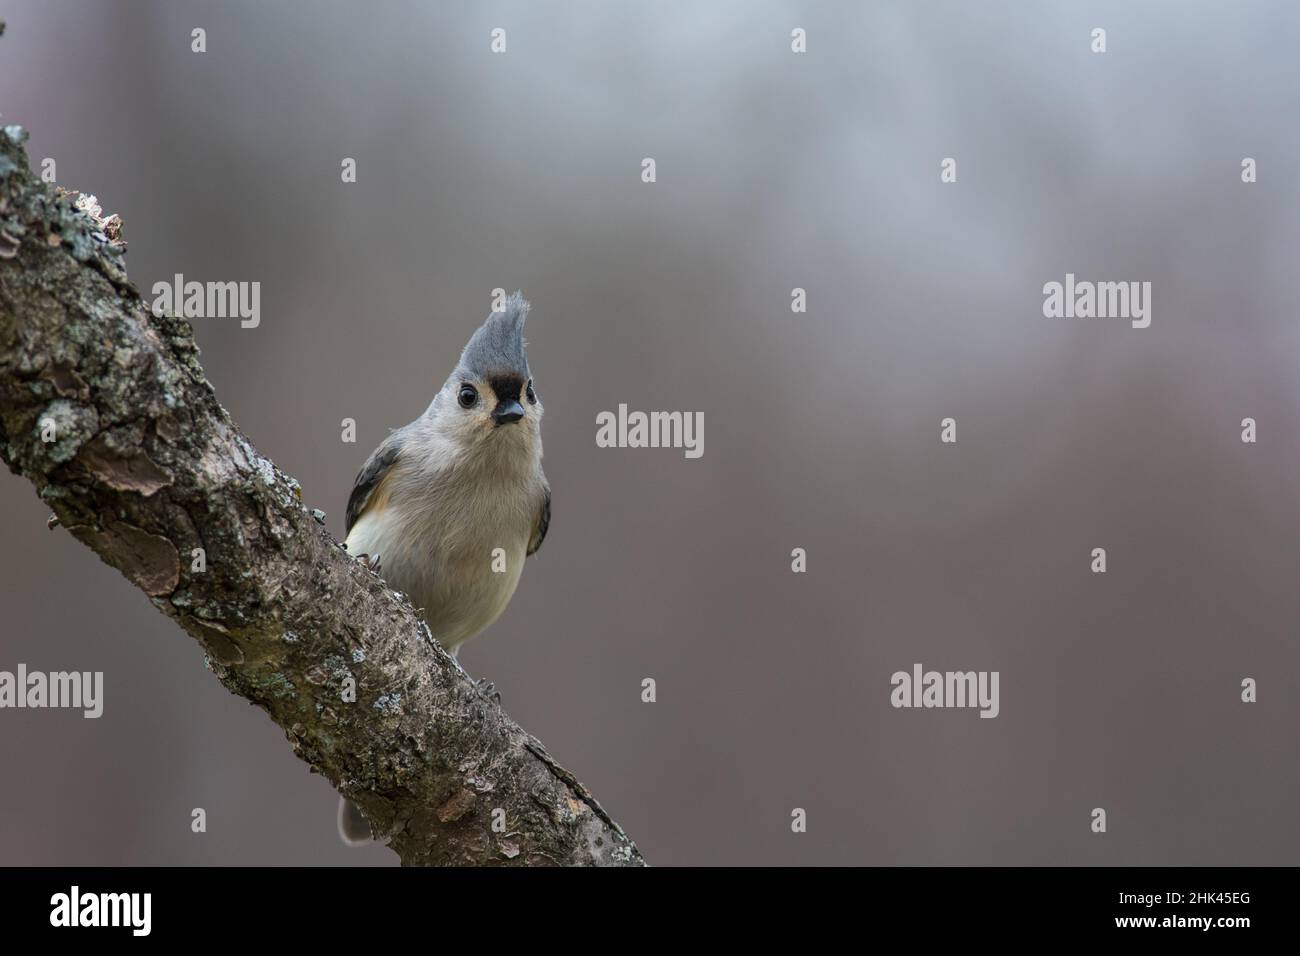 Tufted Titmouse looking out from a tree branch Stock Photo